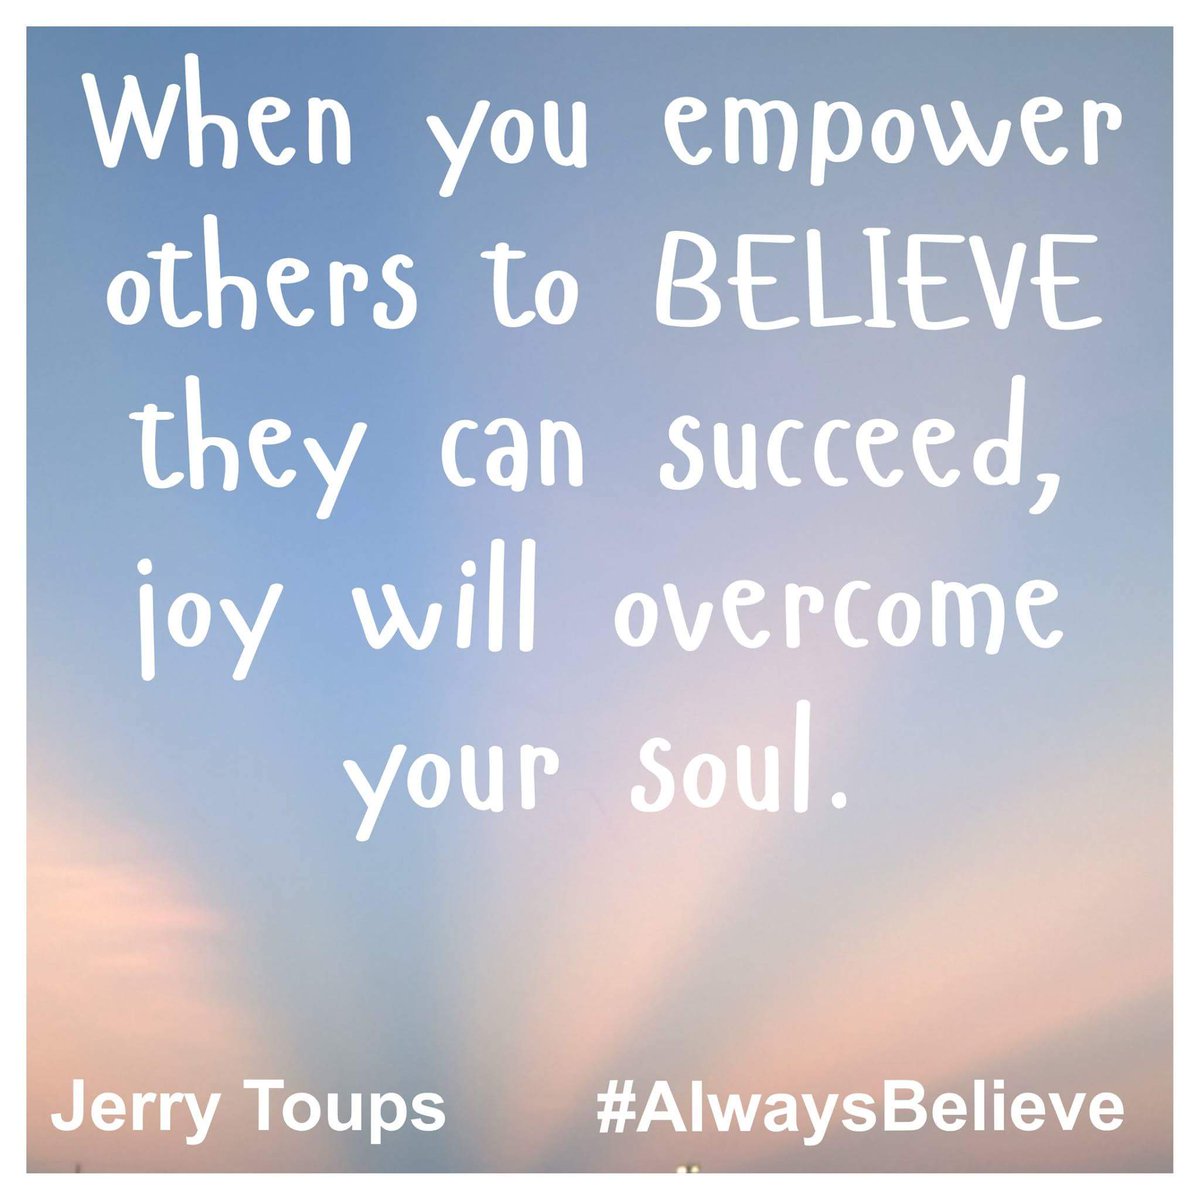 The #AlwaysBelieve #InspiredPhrase of the day.
Mon. 6.5.23 
Coming to @Terry_Rangers this August. 
The power of BELIEVING and the JOY that will generate.